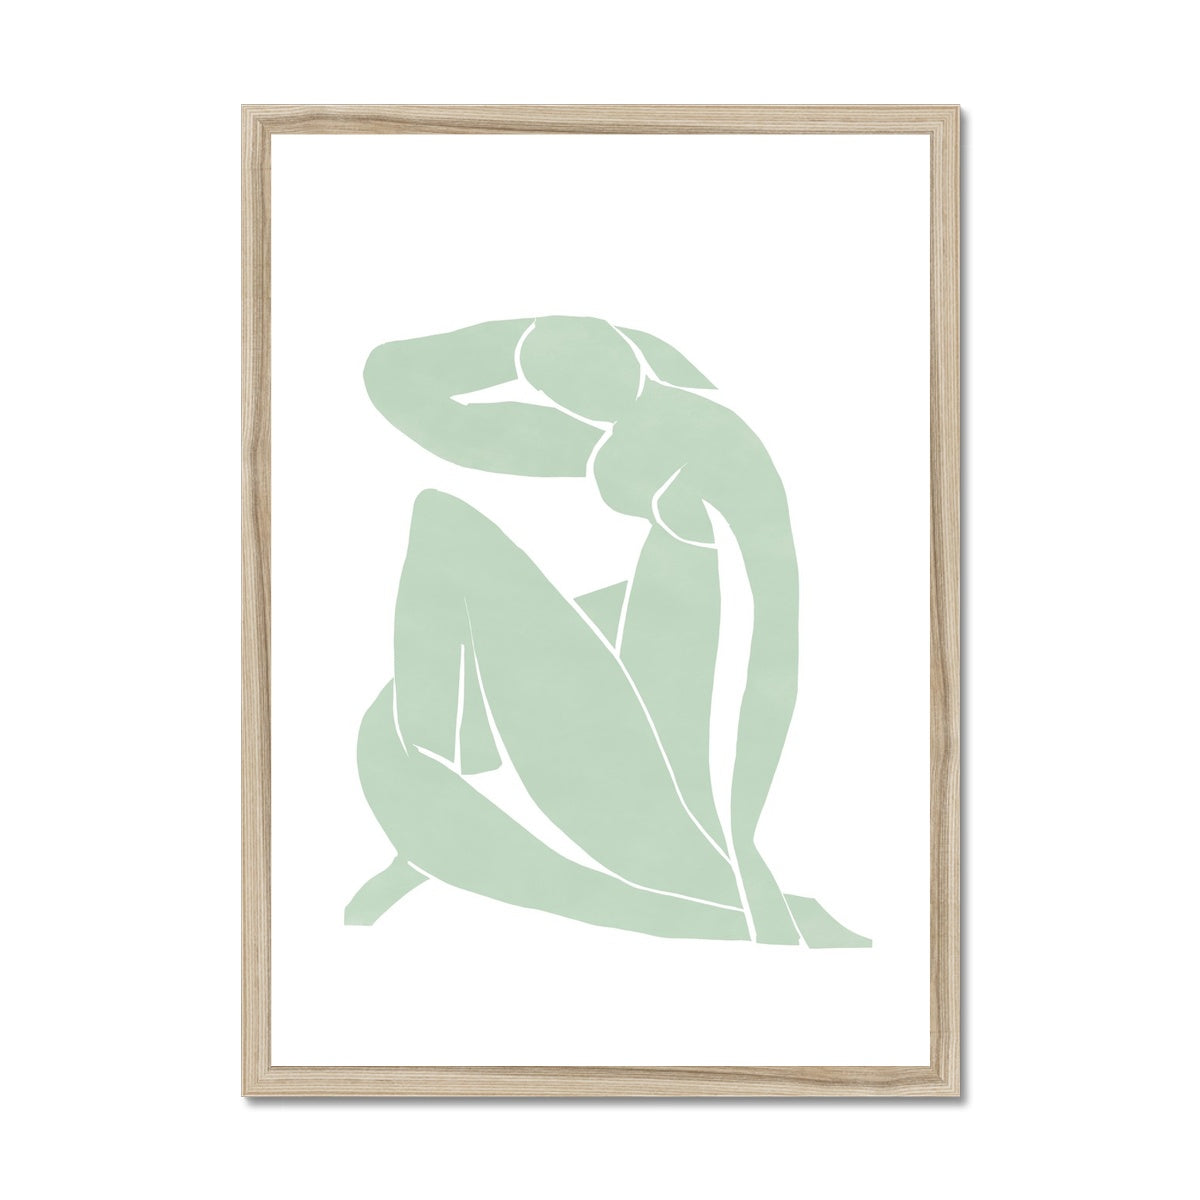 © les muses / Matisse wall art prints featuring nude figure cut outs or "Papiers Découpés" in a danish pastel style. Matisse exhibition posters with paper cut-outs. Berggruen & Cie museum prints for your gallery wall.